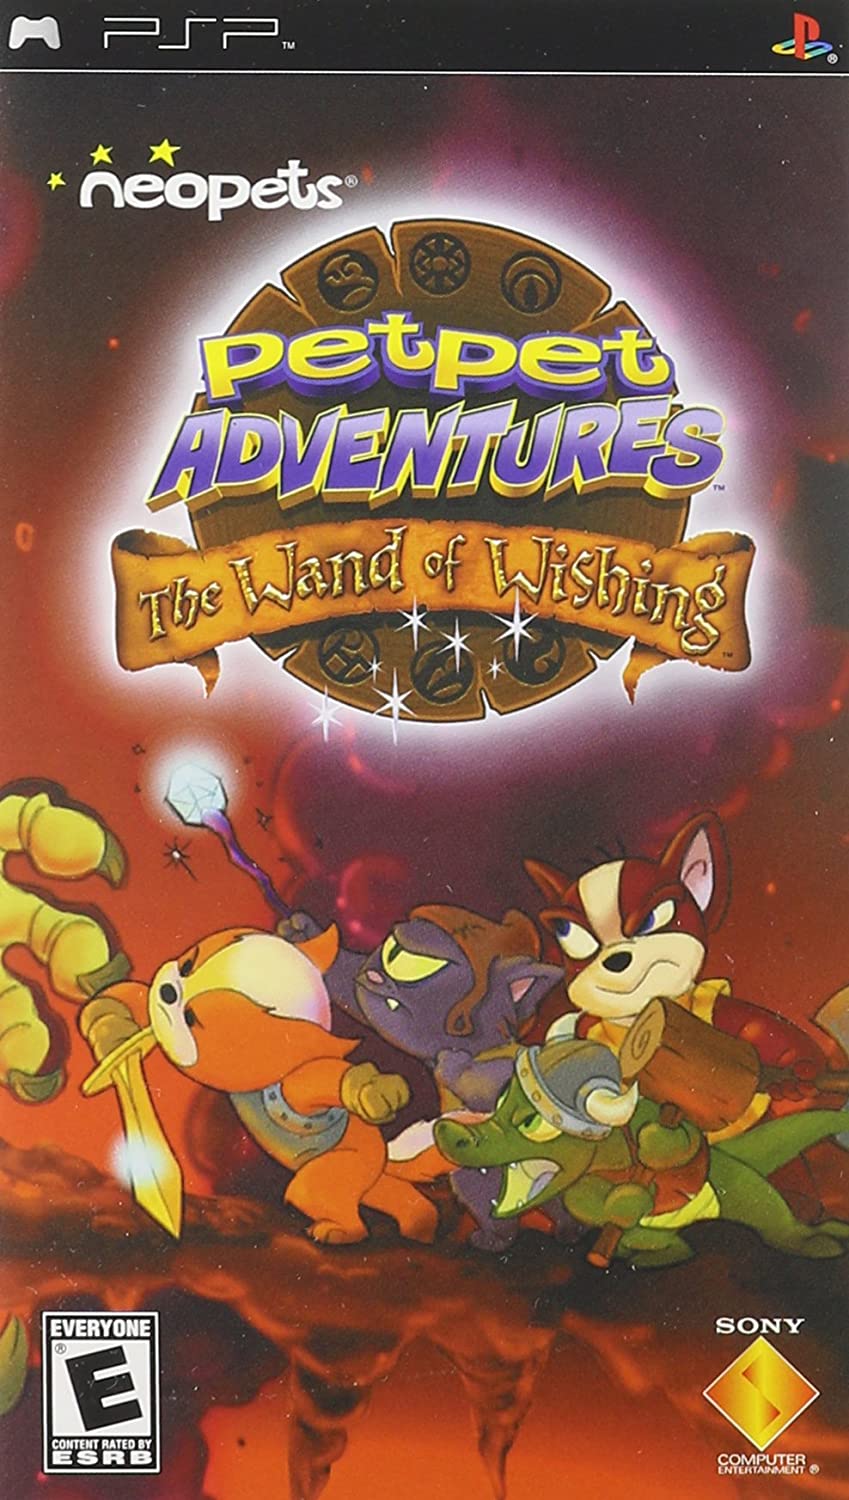 Download Neopets Petpet Adventures The Wand of Wishing PSP